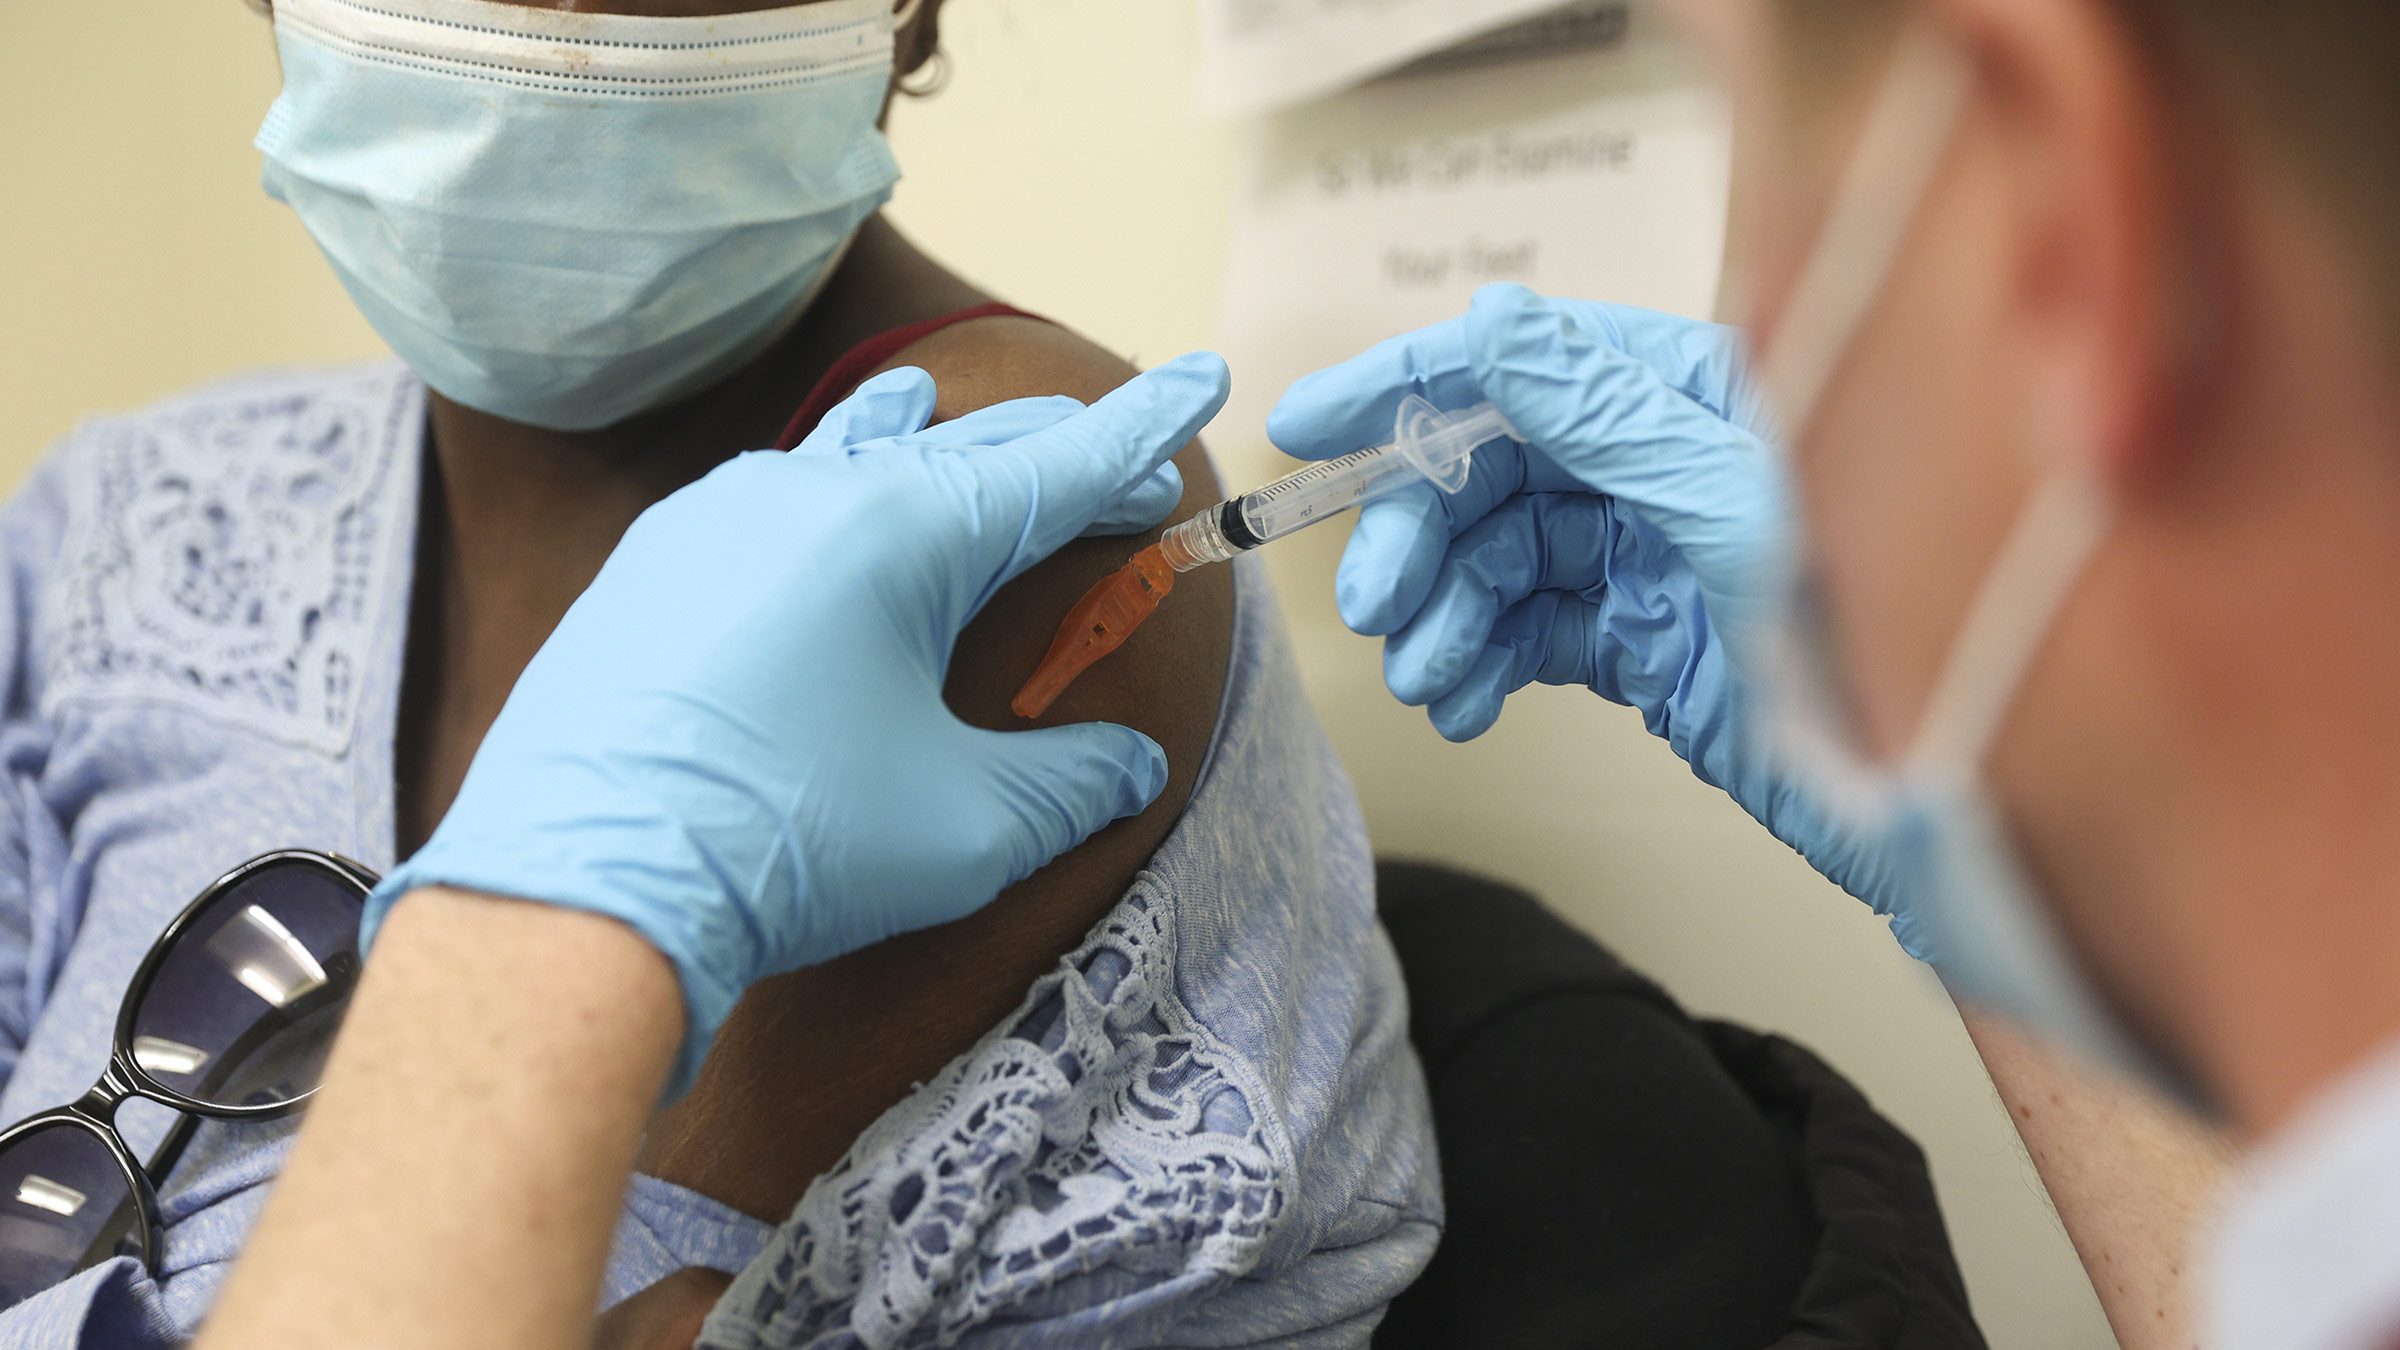 A health worker administers a Covid-19 vaccine at a shelter in New York, on March 25.